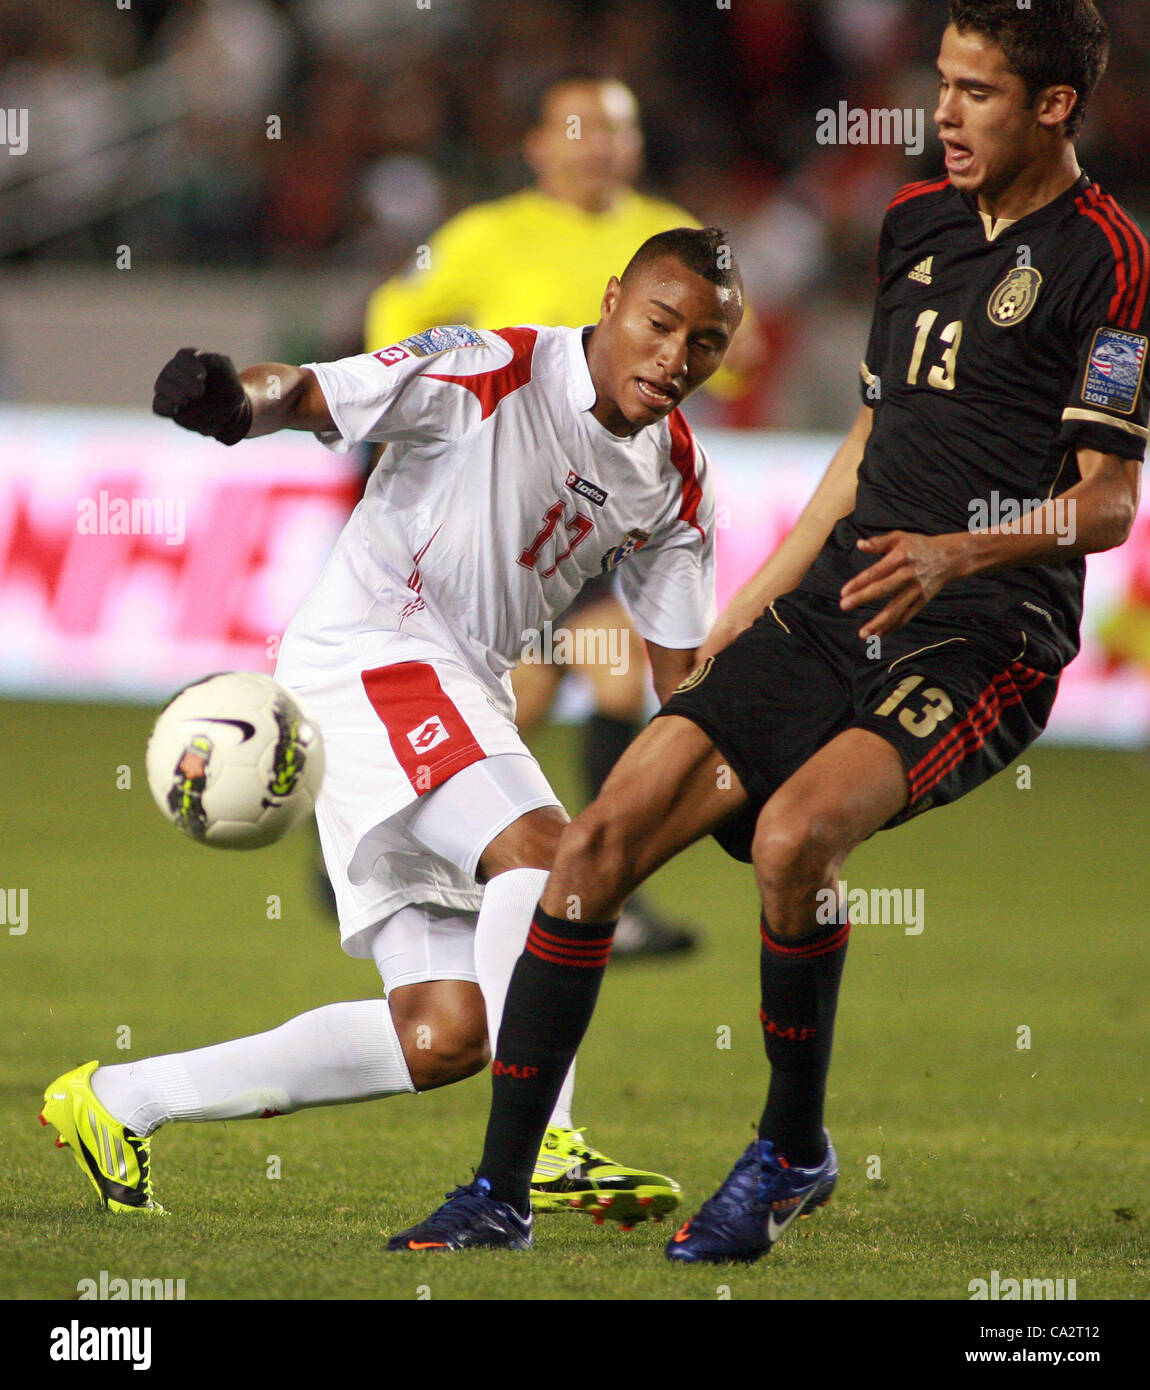 March 27, 2012 - Los Angeles, California, U.S. - Panama's  Yairo Glaize (L) and Mexico's Diego Reyes battle for a ball during the 2012 CONCACAF Men's Olympic Qualifying game at The Home Depot Center on March 27, 2012 in Carson, California. Mexico won Panama 1-0. (Credit Image: © Ringo Chiu/ZUMAPRESS Stock Photo